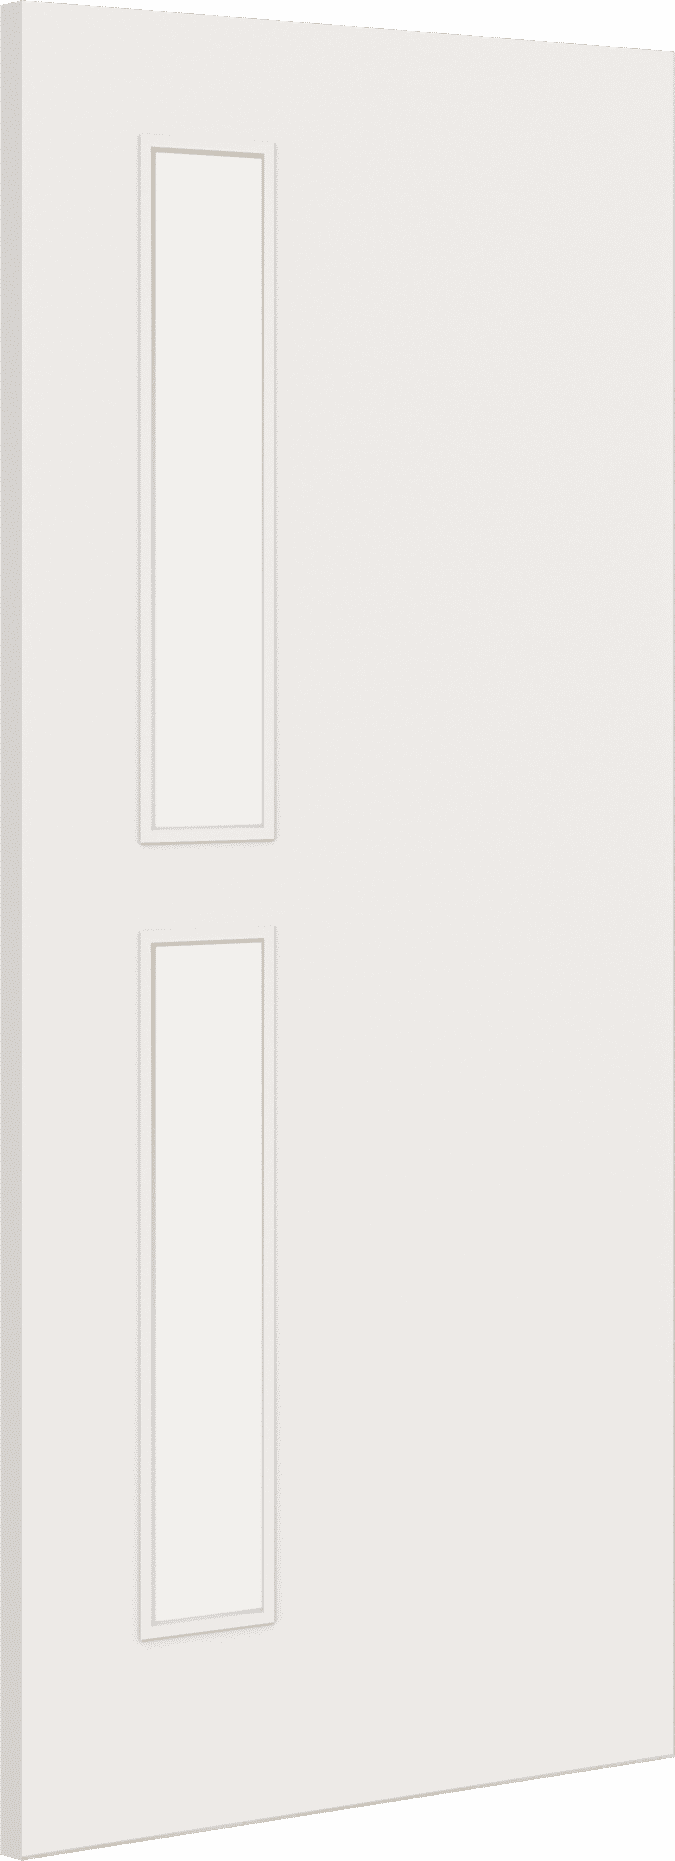 1981mm x 762mm x 44mm (30") Architectural Paint Grade White 07 Clear Glazed Fire Door Blank